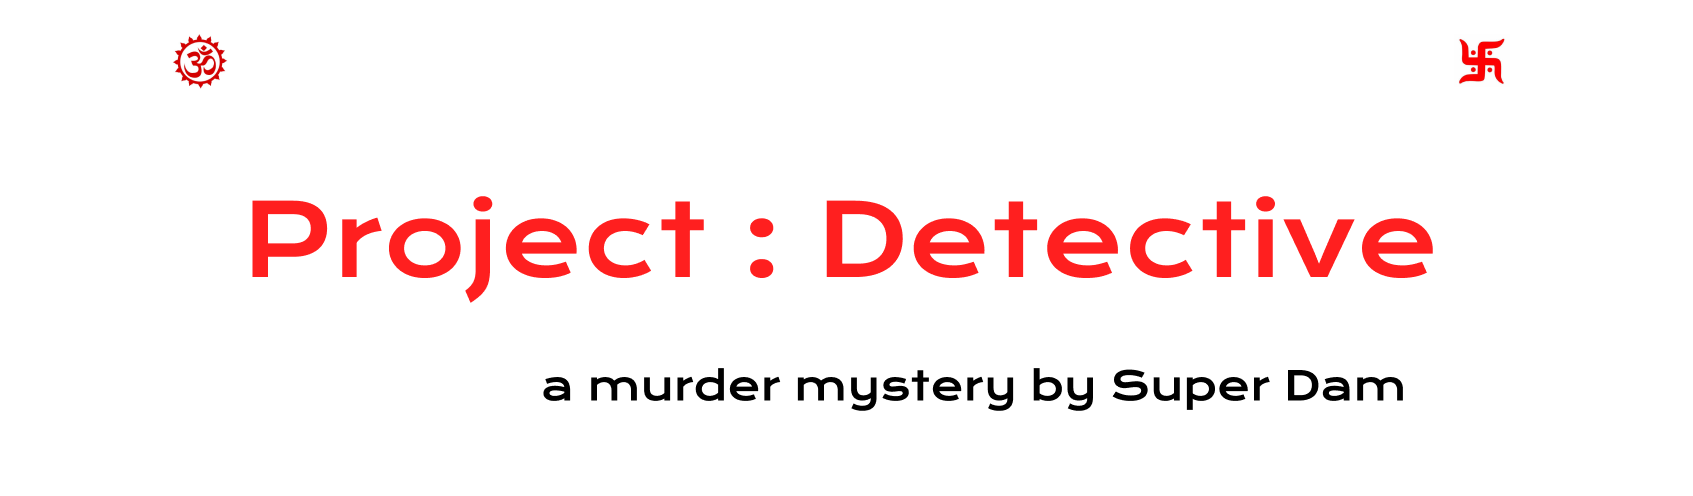 Project: Detective